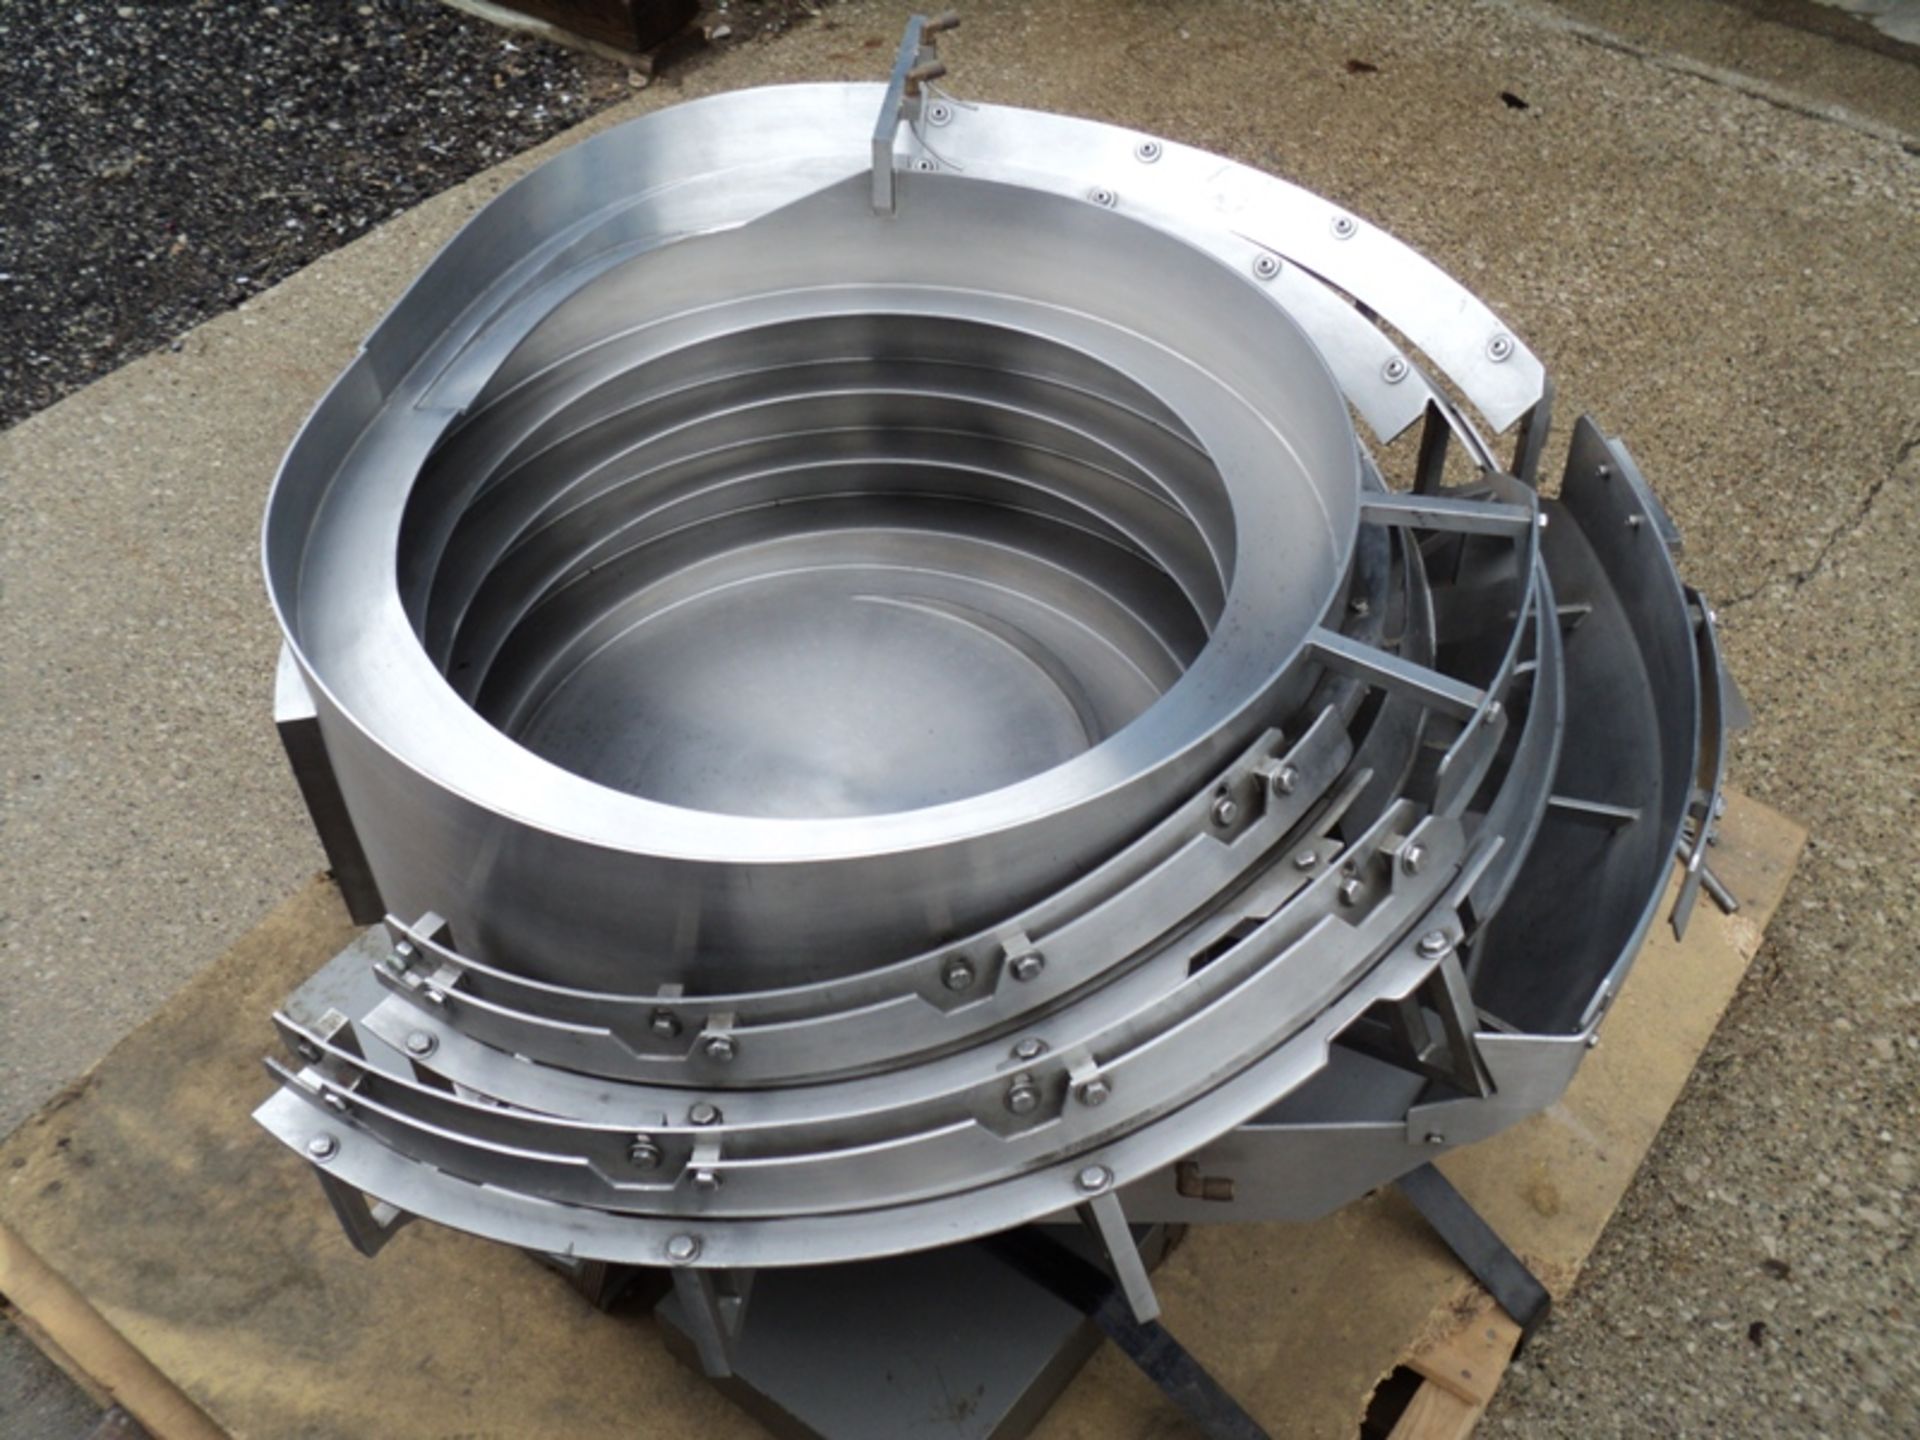 Service Engineering Vibratory Bowl 24" S/N 21614 24" CW Vibratory Feeder Rate 70 PPM Foot print: - Image 3 of 9